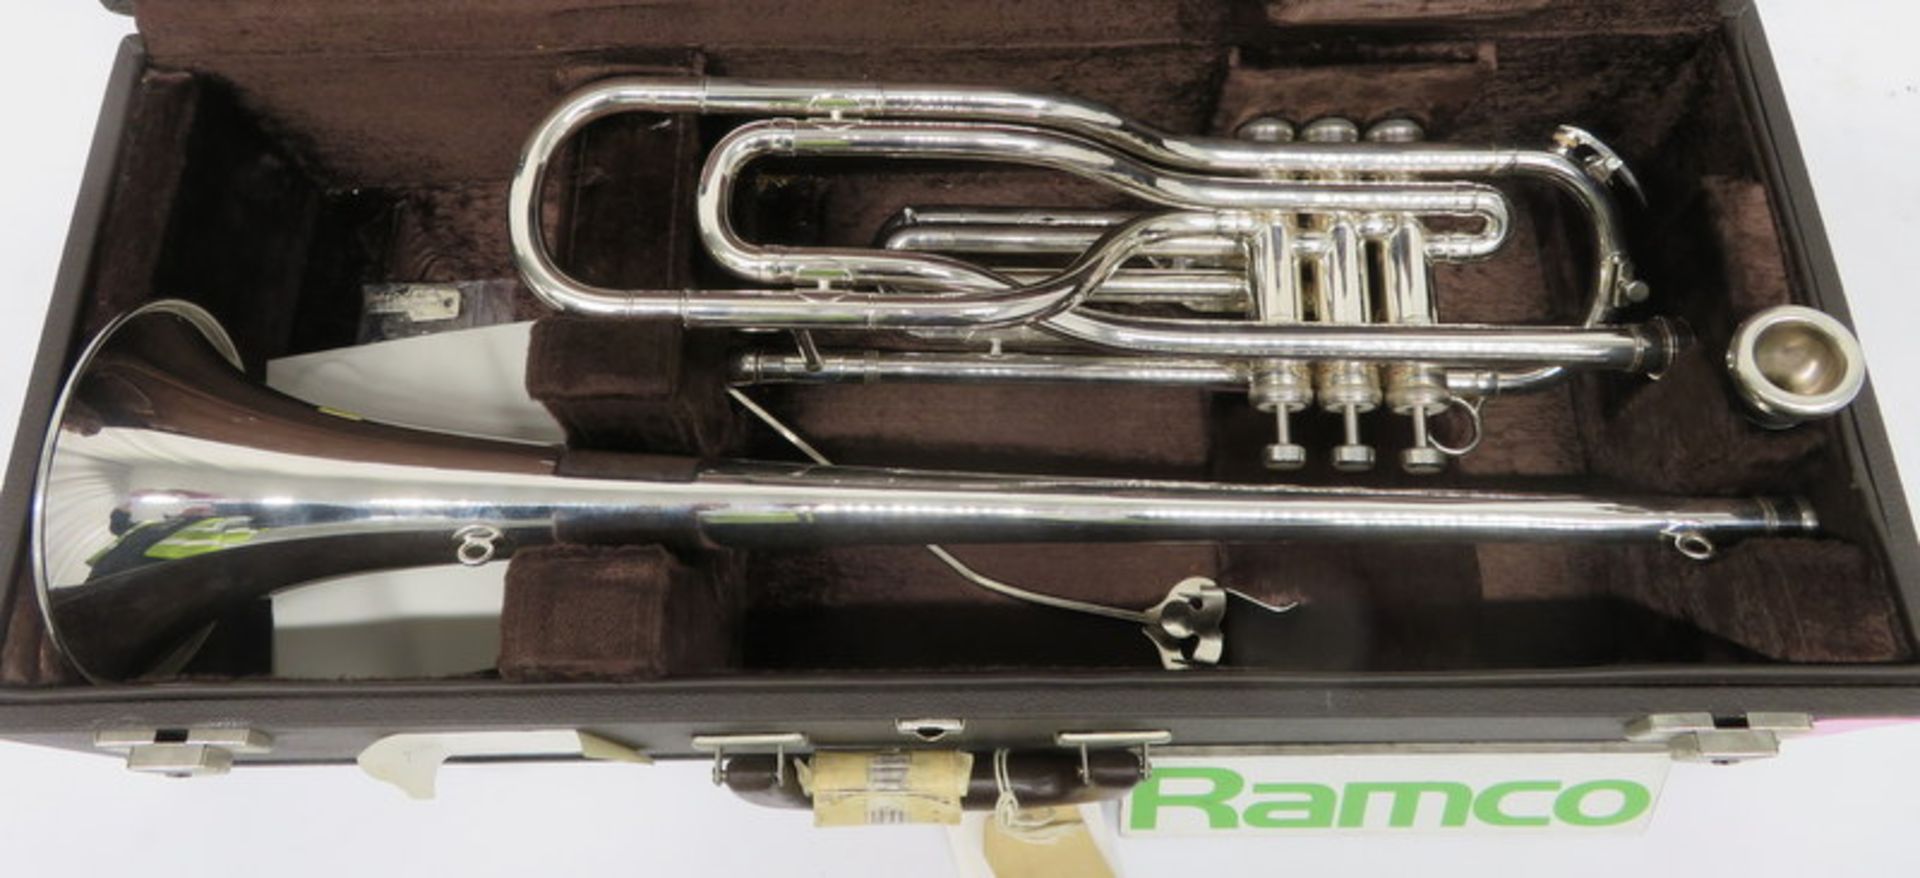 Besson International BE707 Fanfare Trumpet With Case. Serial Number: 867451. Please Note T - Image 2 of 17